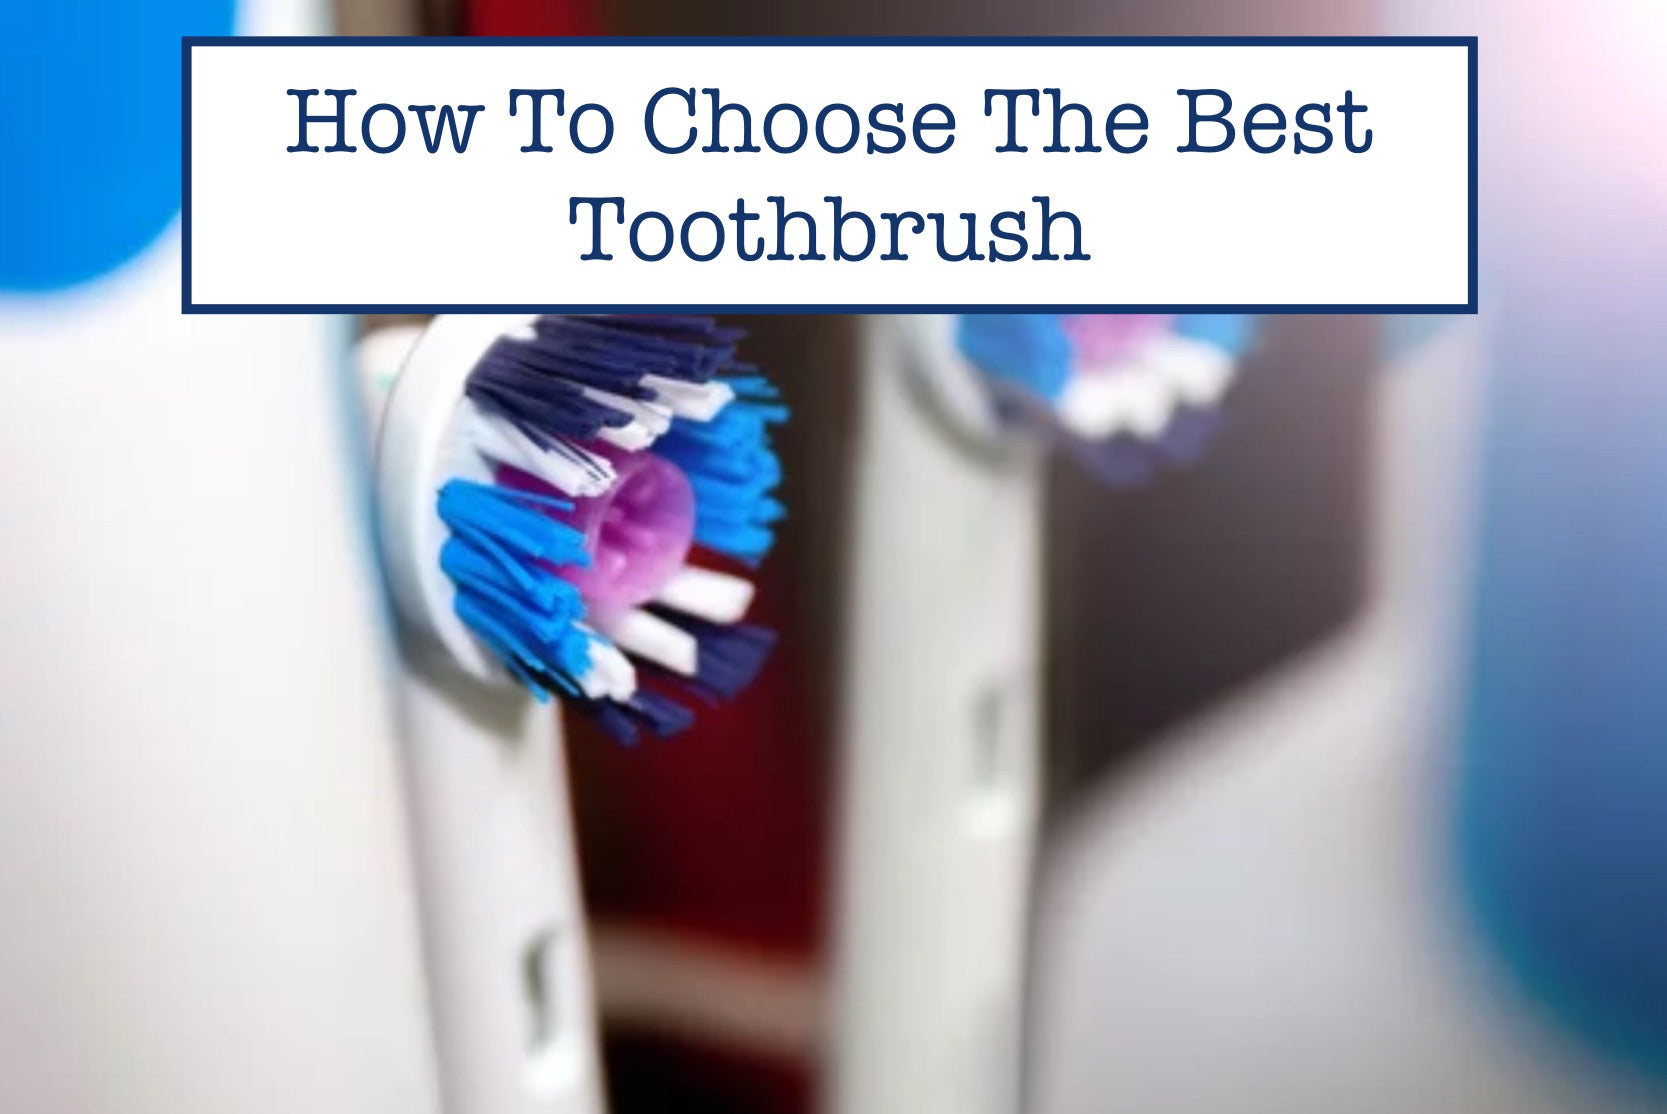 How To Choose The Best Toothbrush